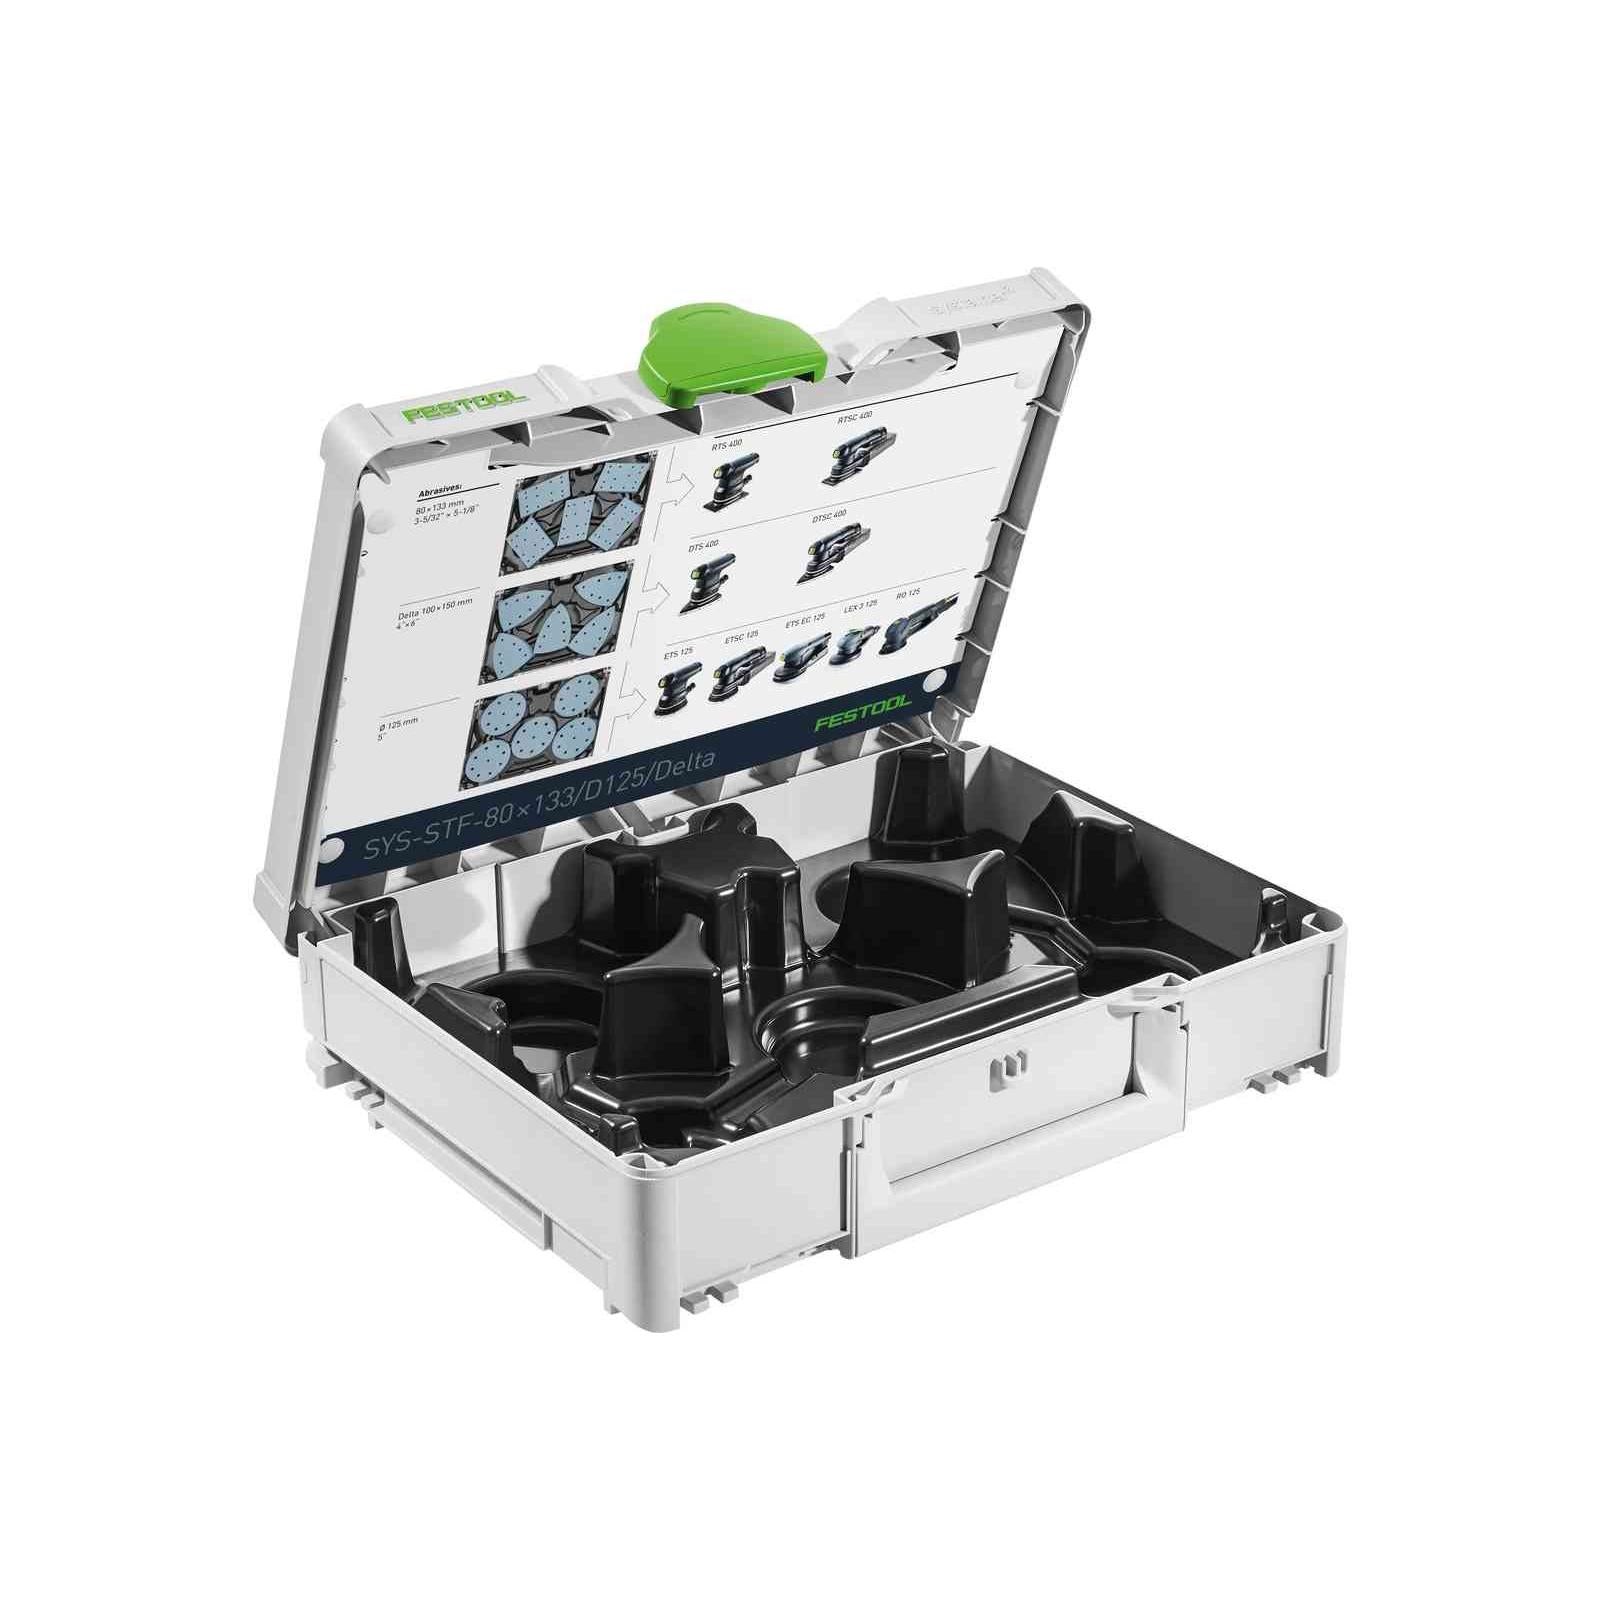 Festool Systainer SYS-STF-80x133/D125/Delta 576781 Power Tool Services